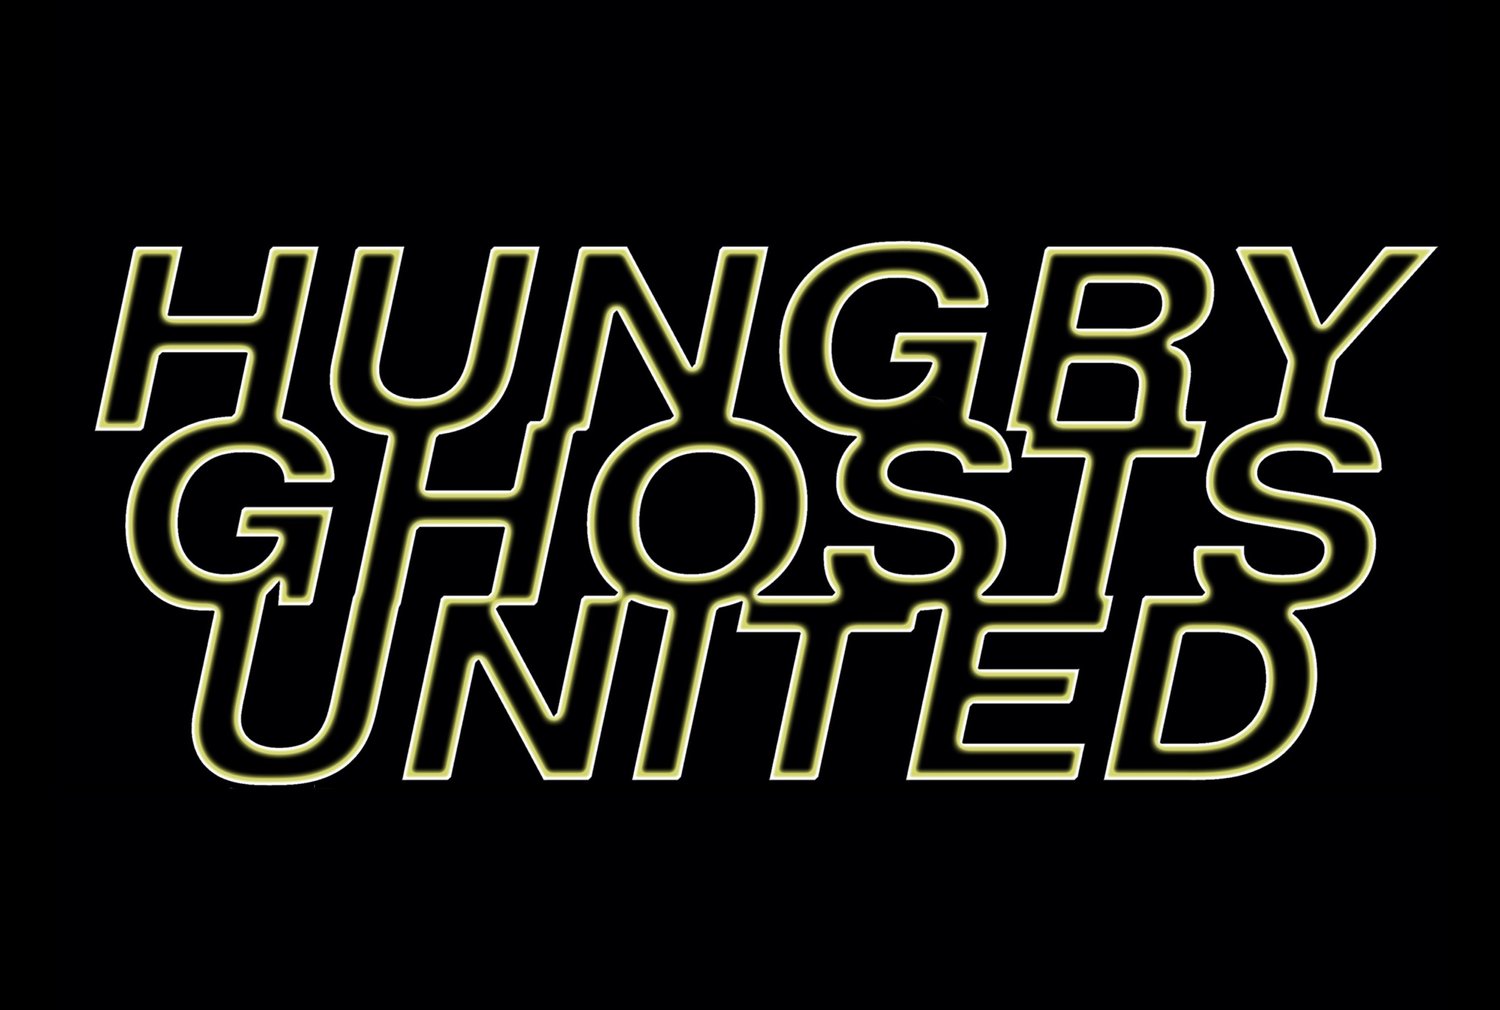 HUNGRY GHOSTS UNITED